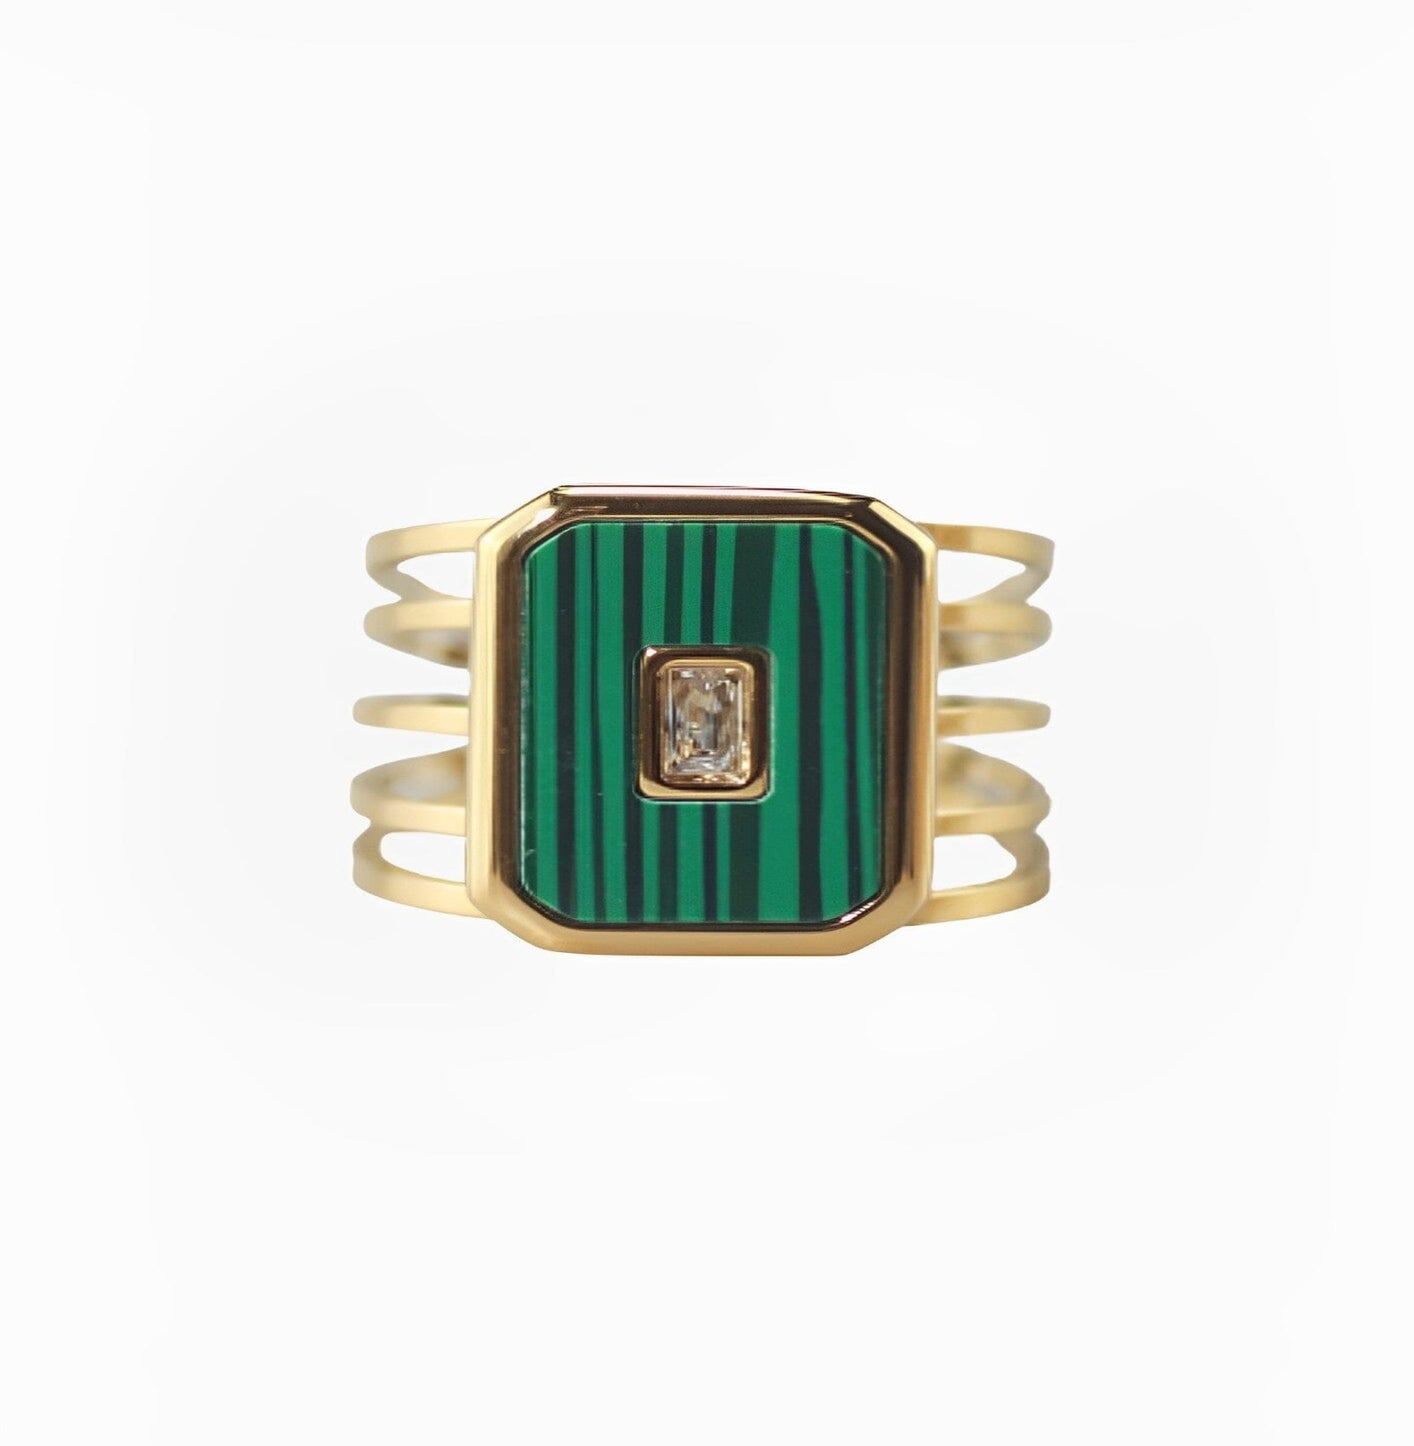 JAZZY RING ring Yubama Jewelry Online Store - The Elegant Designs of Gold and Silver ! 